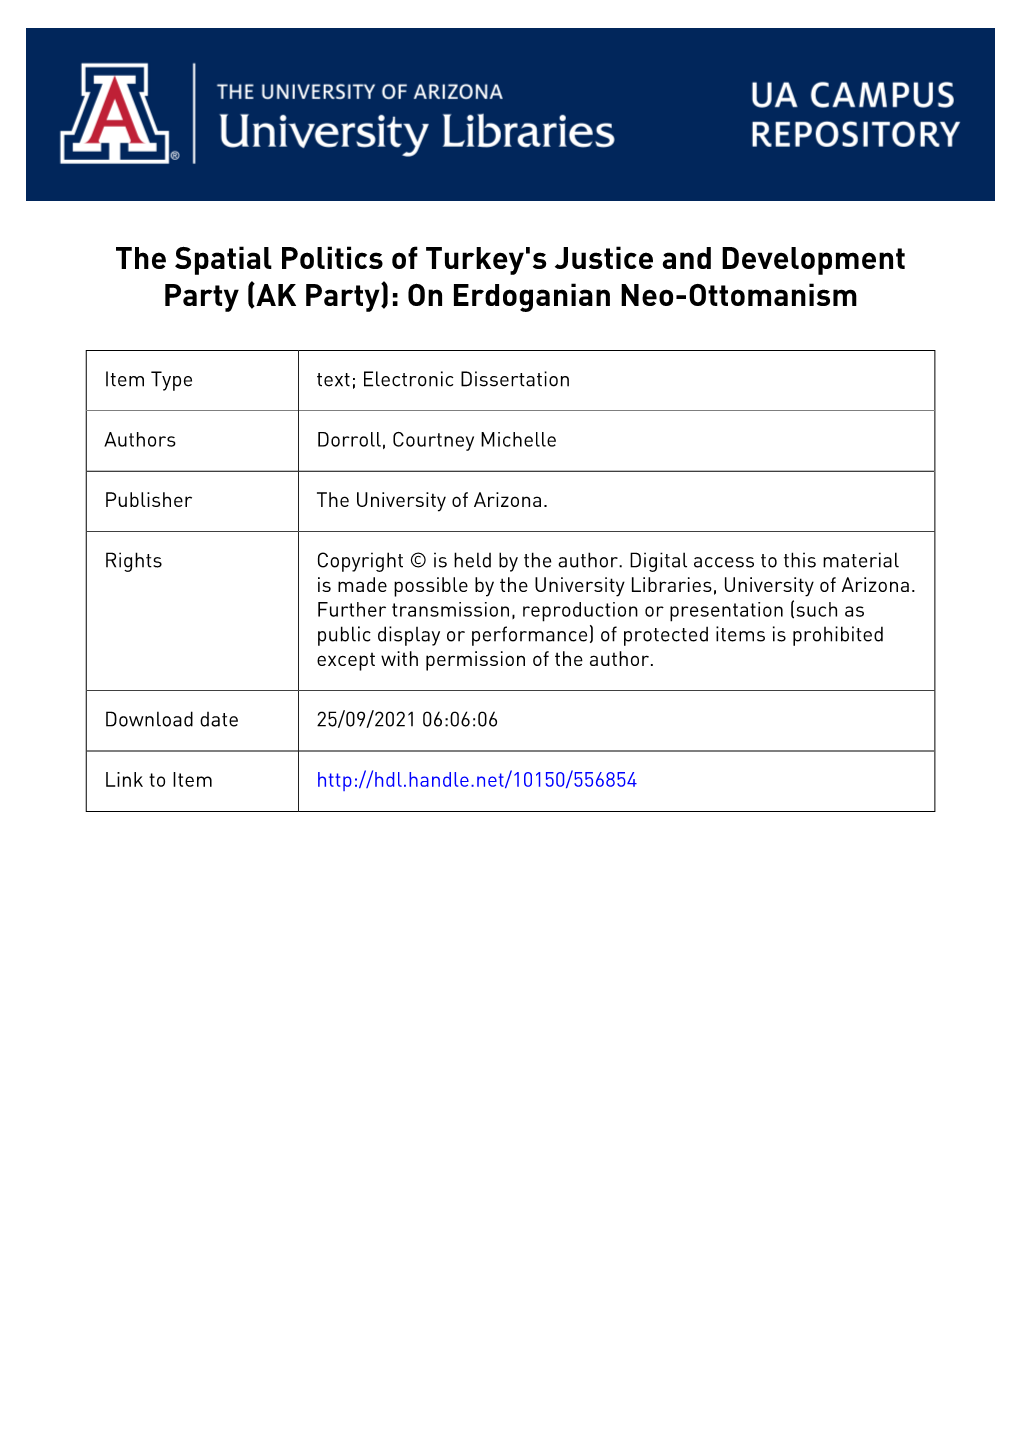 1 the SPATIAL POLITICS of TURKEY's JUSTICE and DEVELOPMENT PARTY (AK PARTY): on ERDOĞANIAN NEO-OTTOMANISM by Courtney Michel